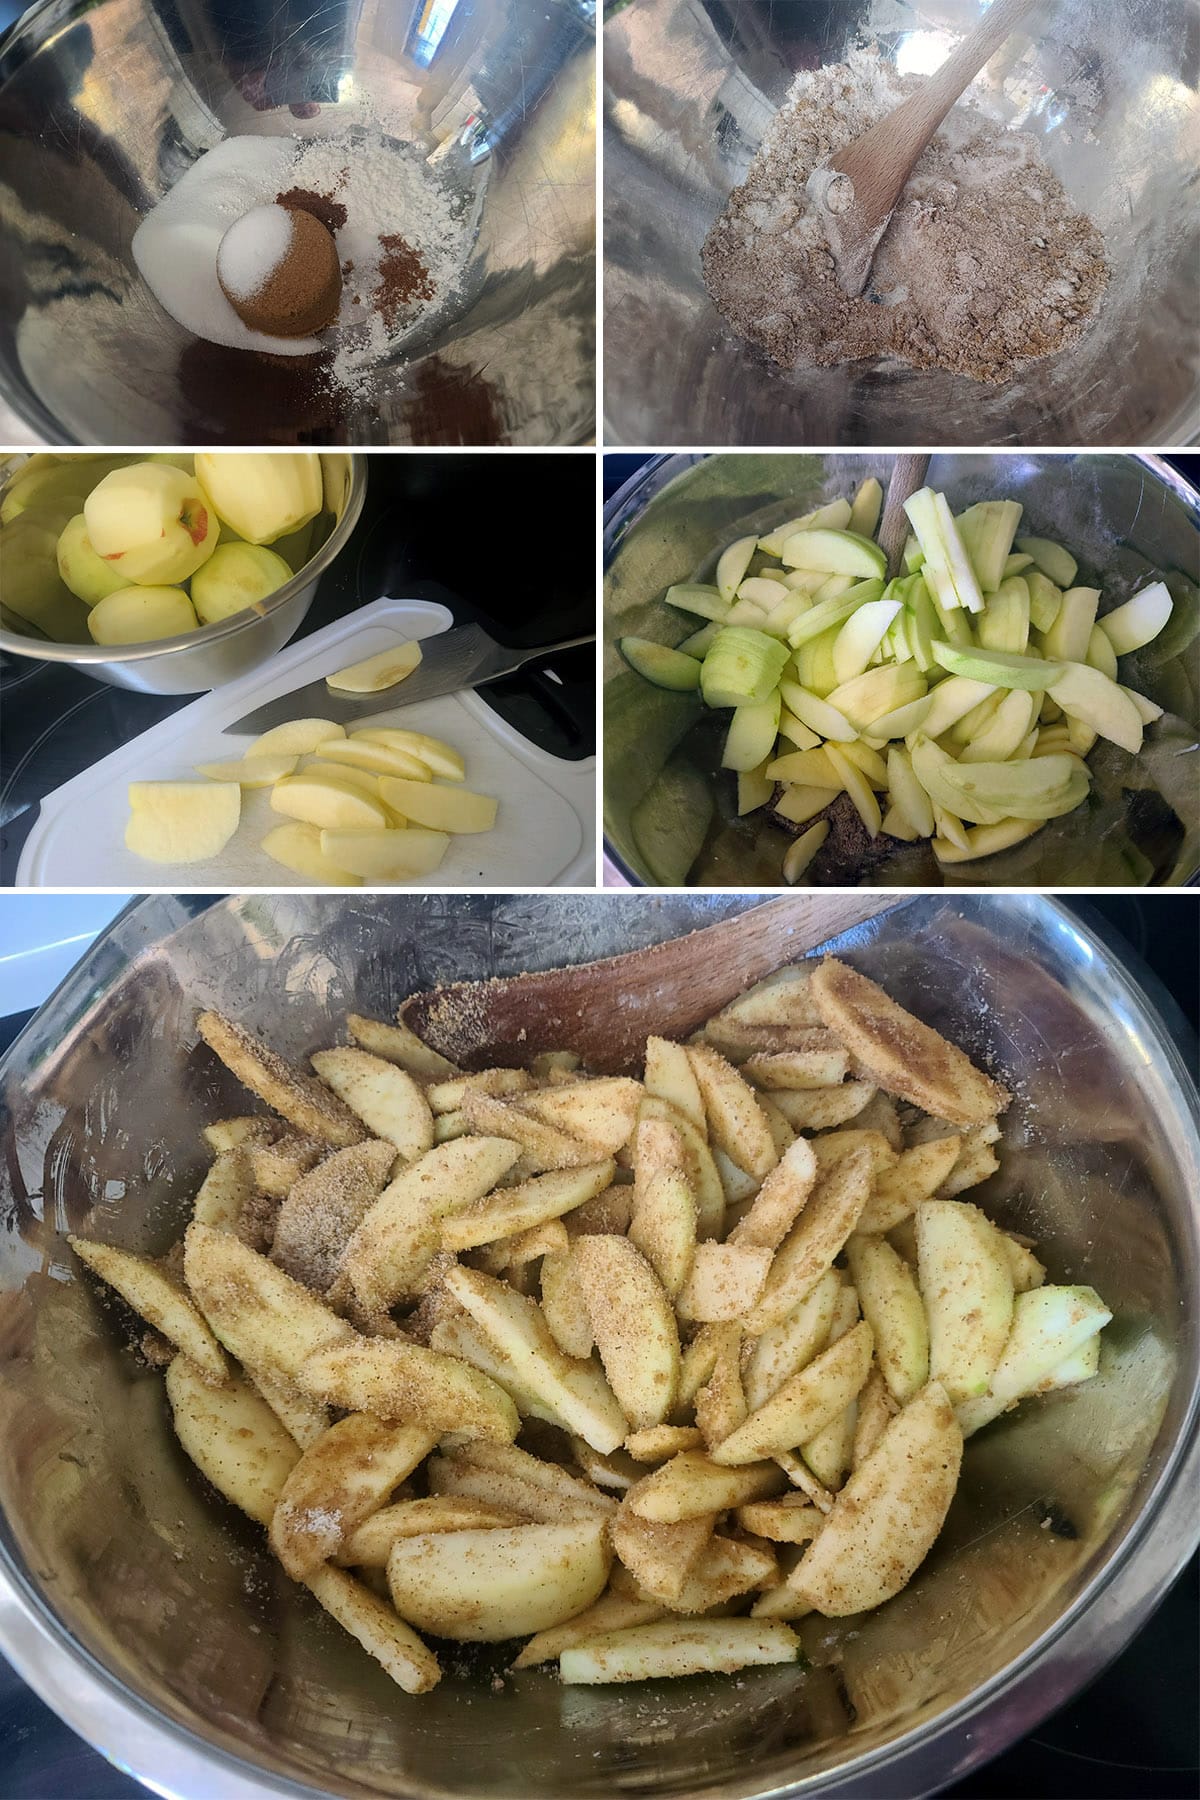 A 5 part image showing the apples being sliced and tossed with the rest of the filling ingredients in a large bowl.